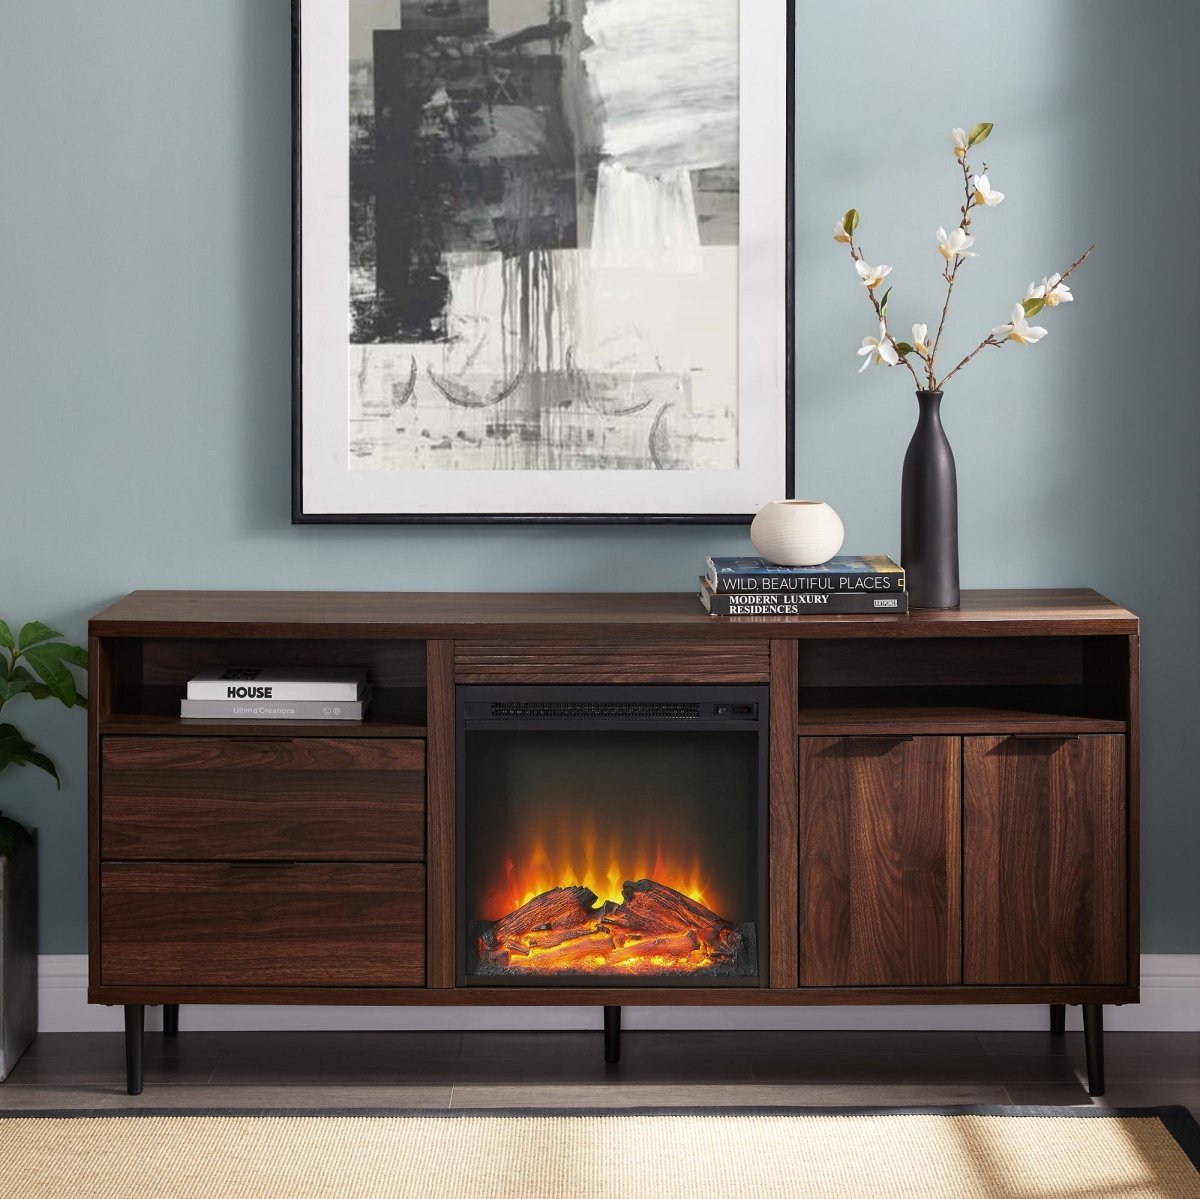 Walker Edison Roth Fireplace Console - lily & onyx